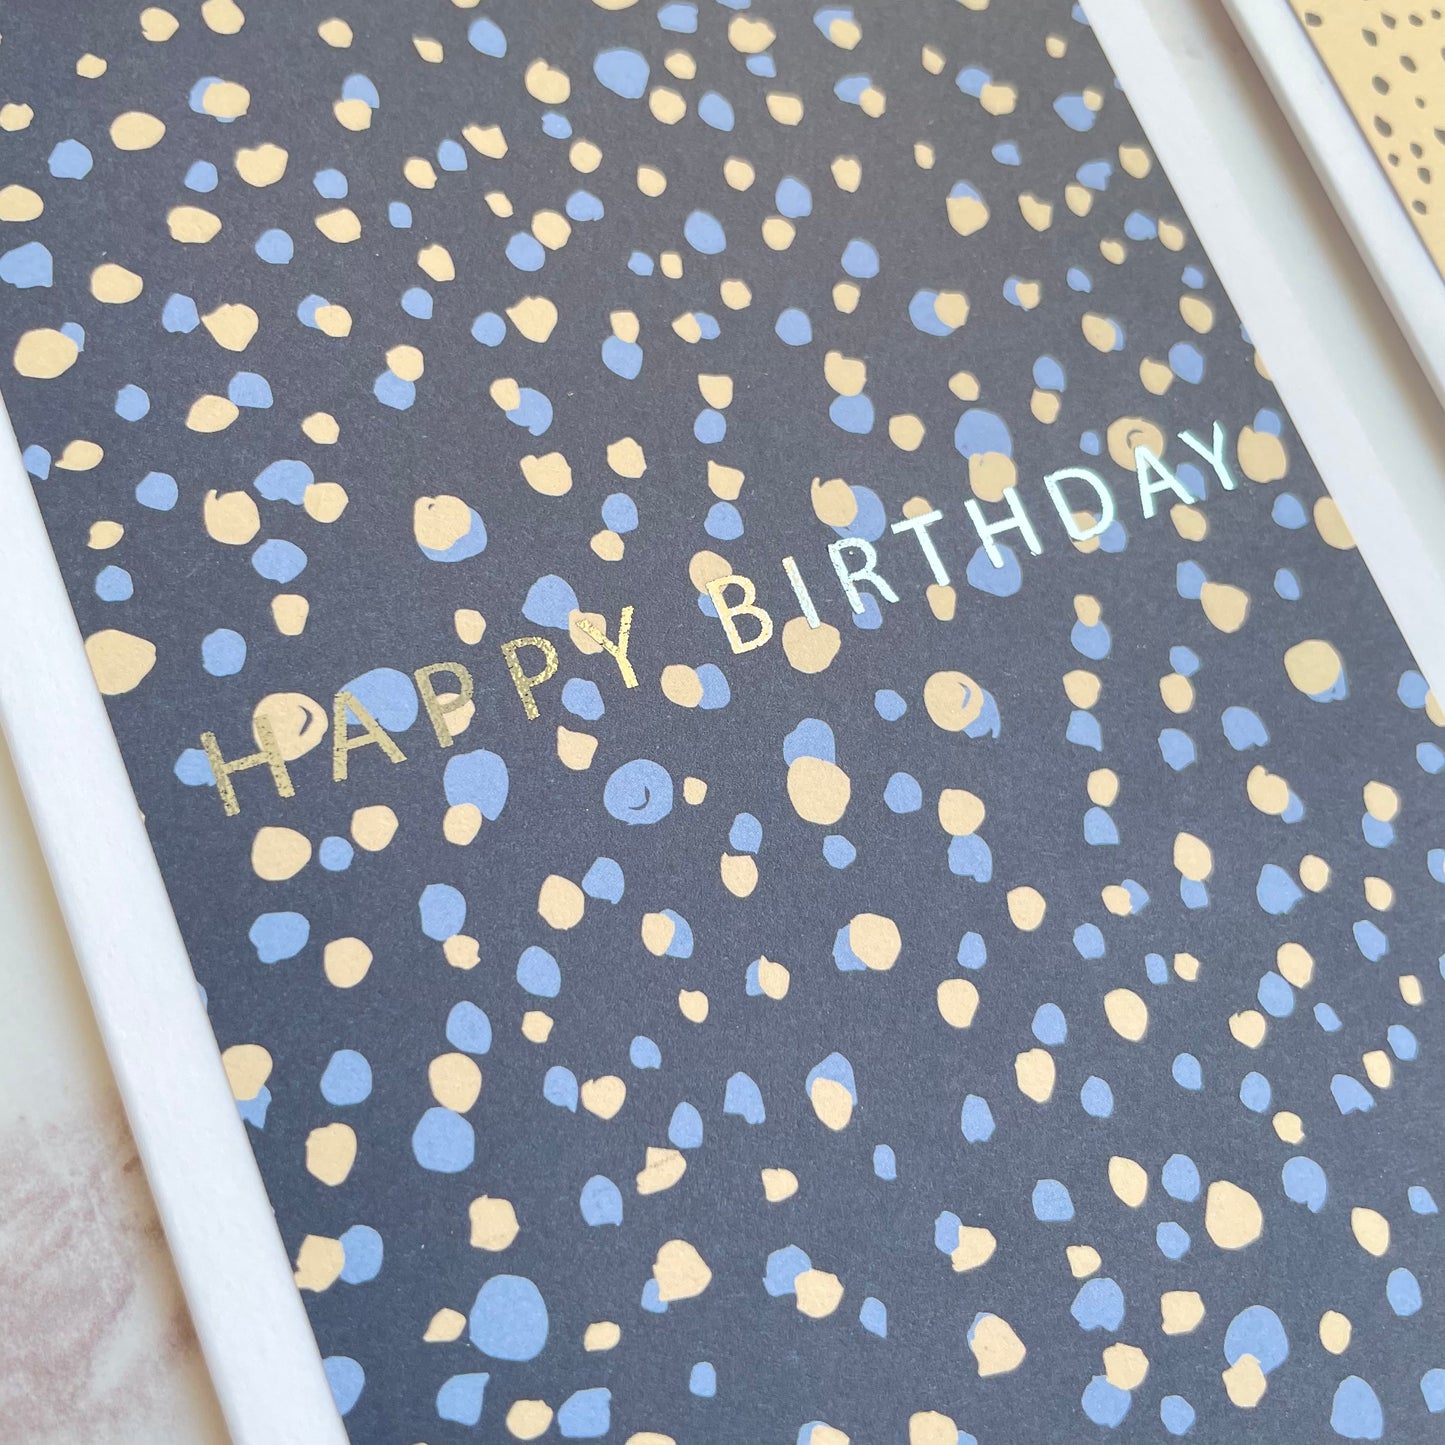 Animal Print Foiled Birthday Cards (4pack)